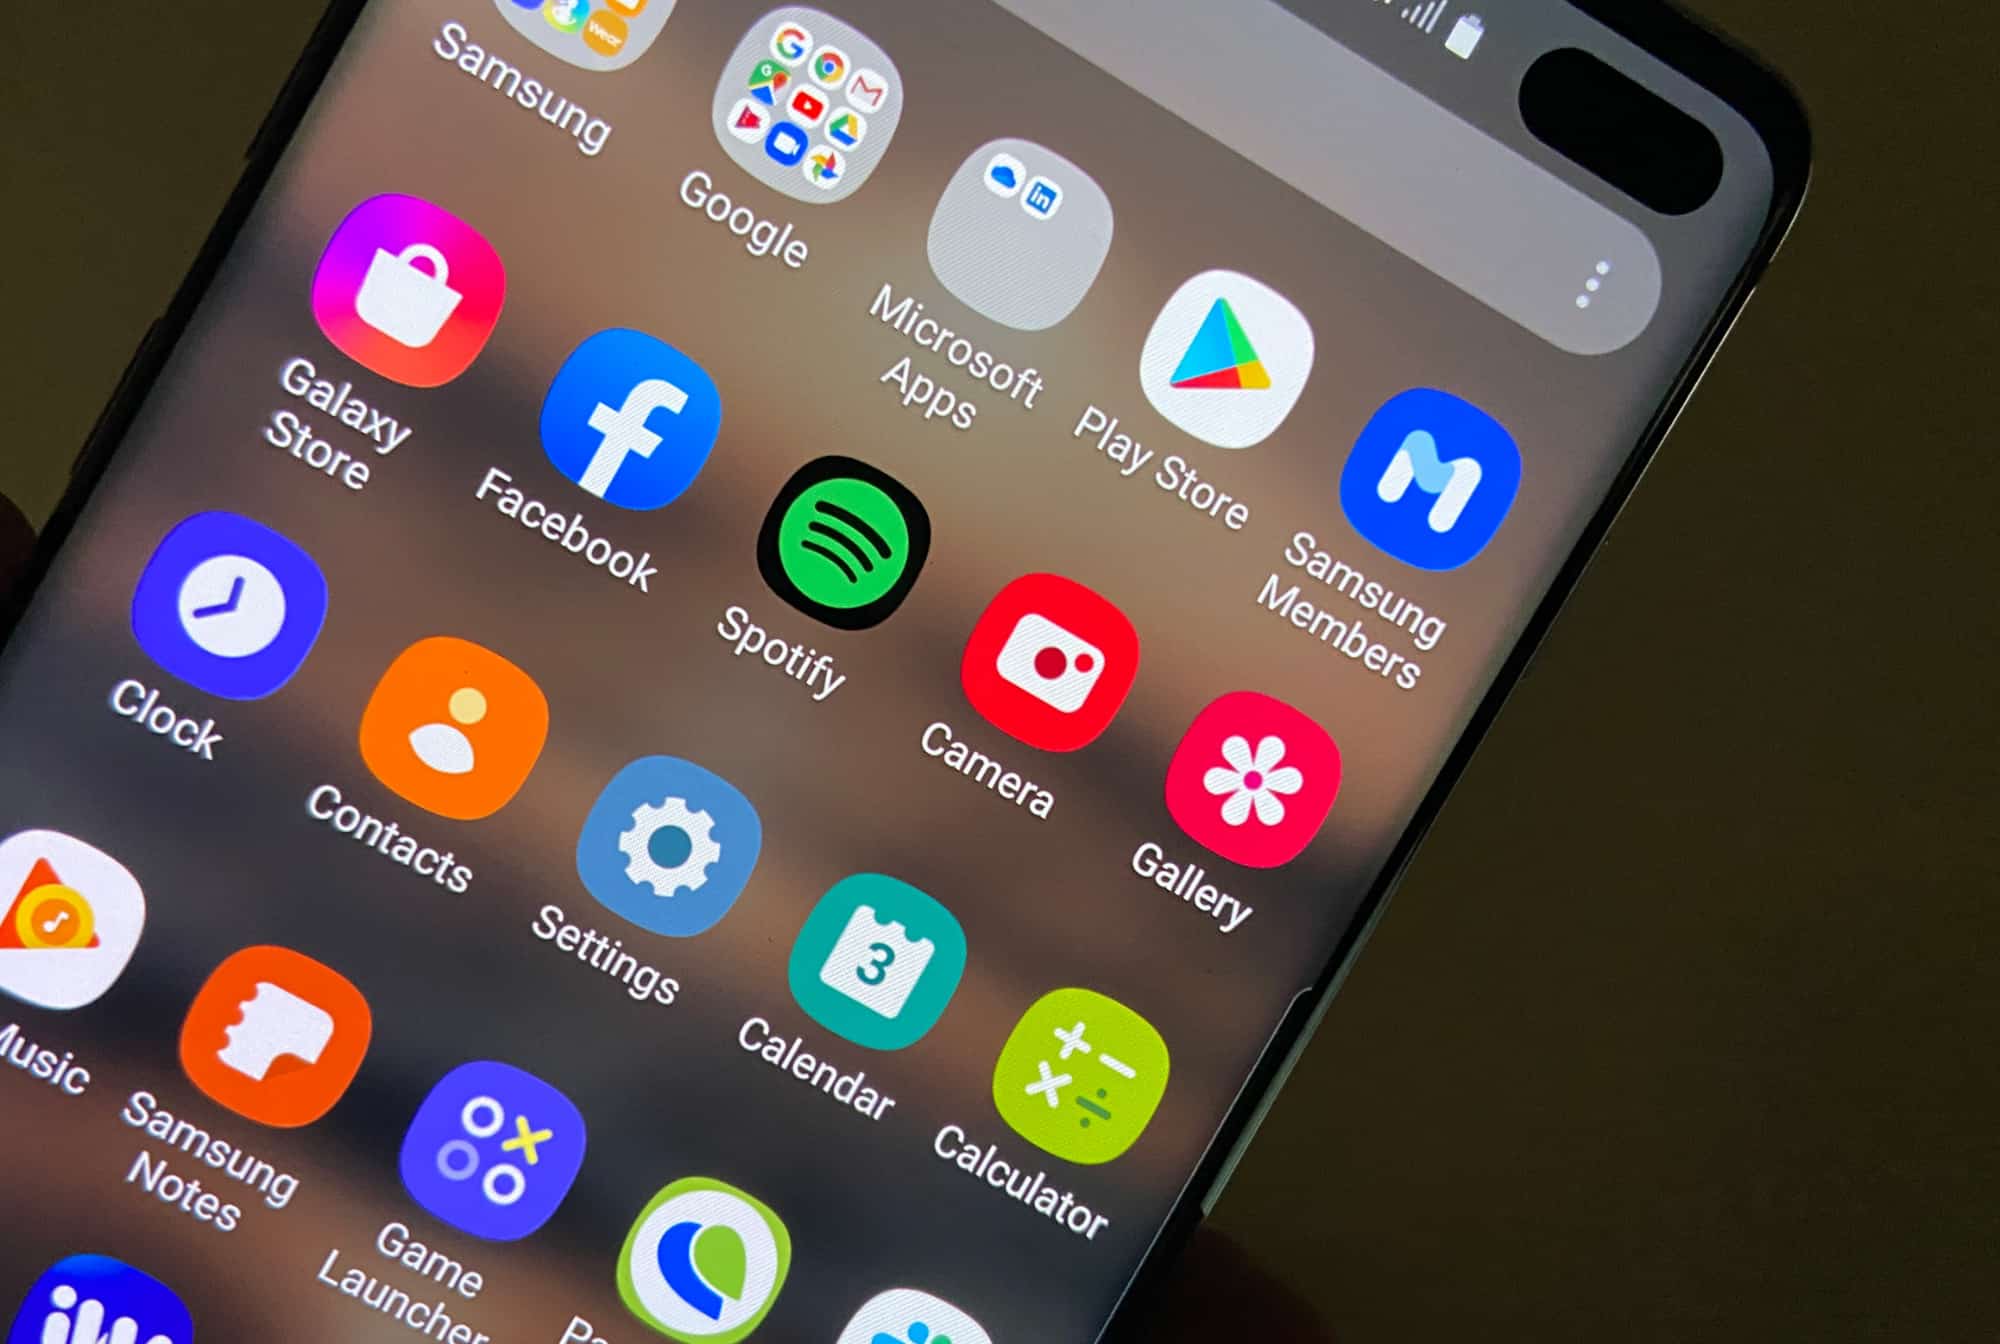 How to fix Camera that keeps crashing after Android 10